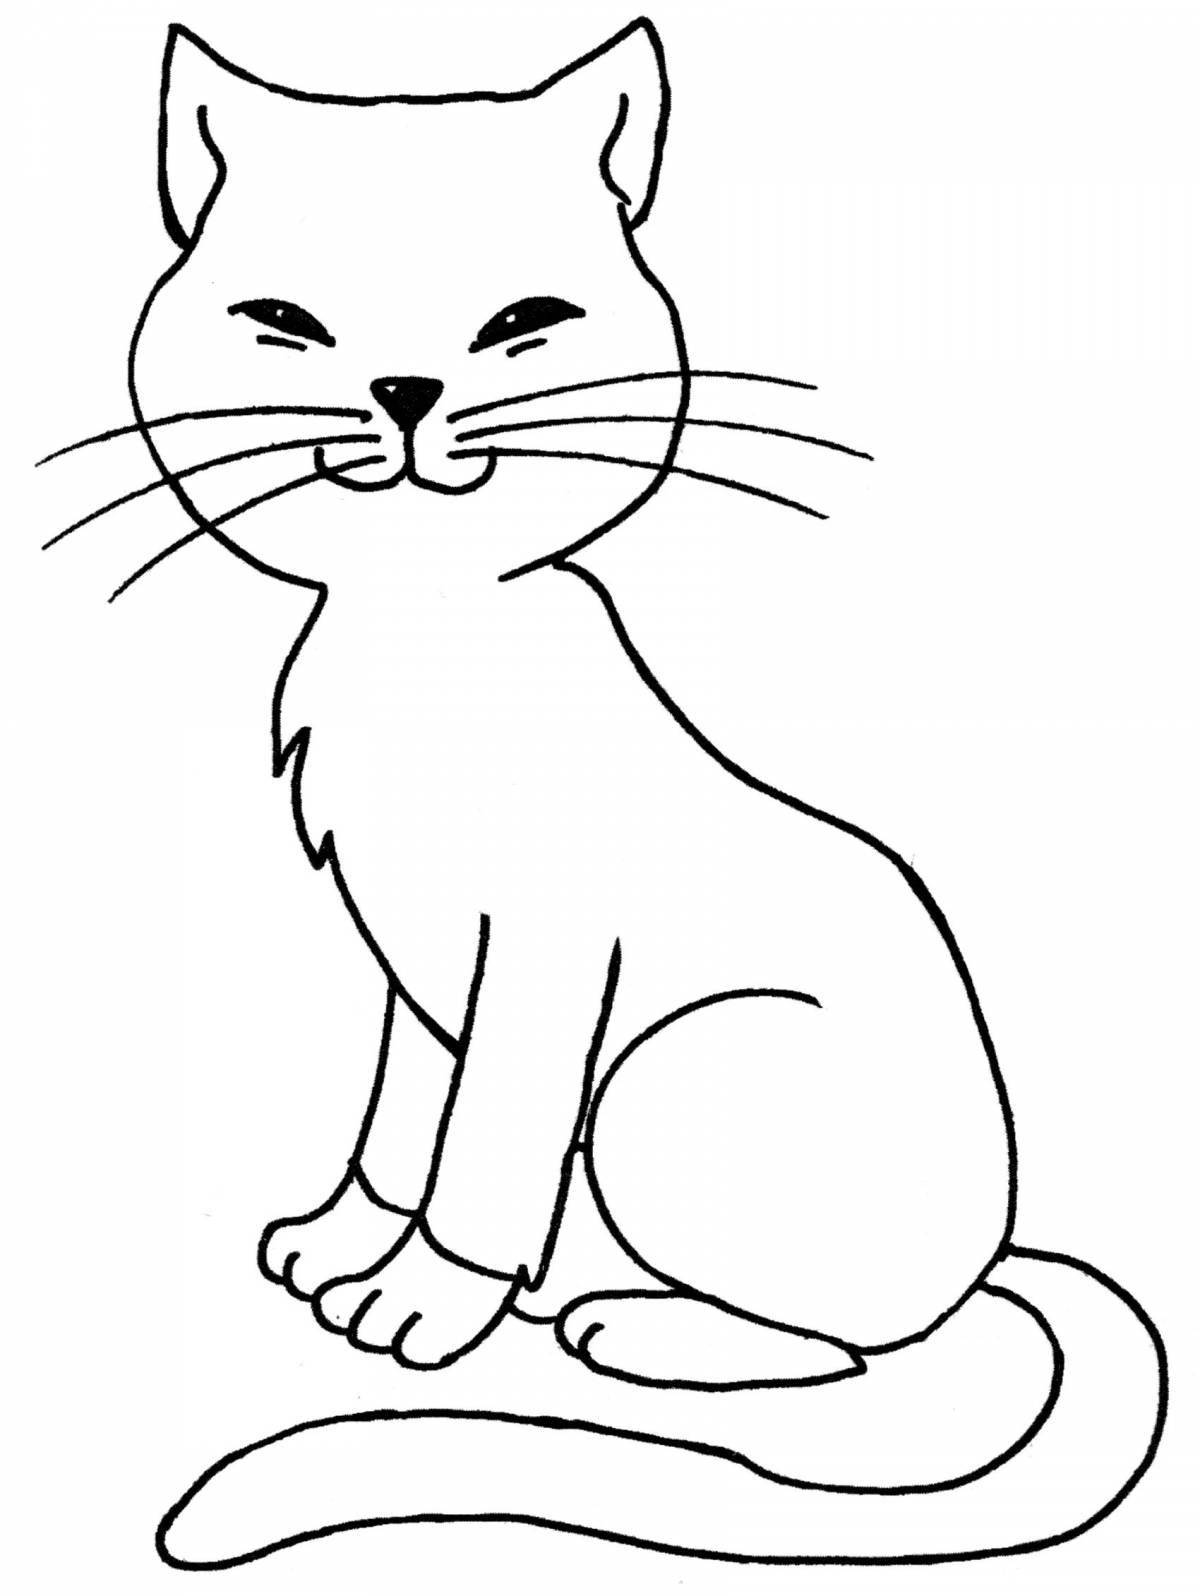 Coloring book witty cat